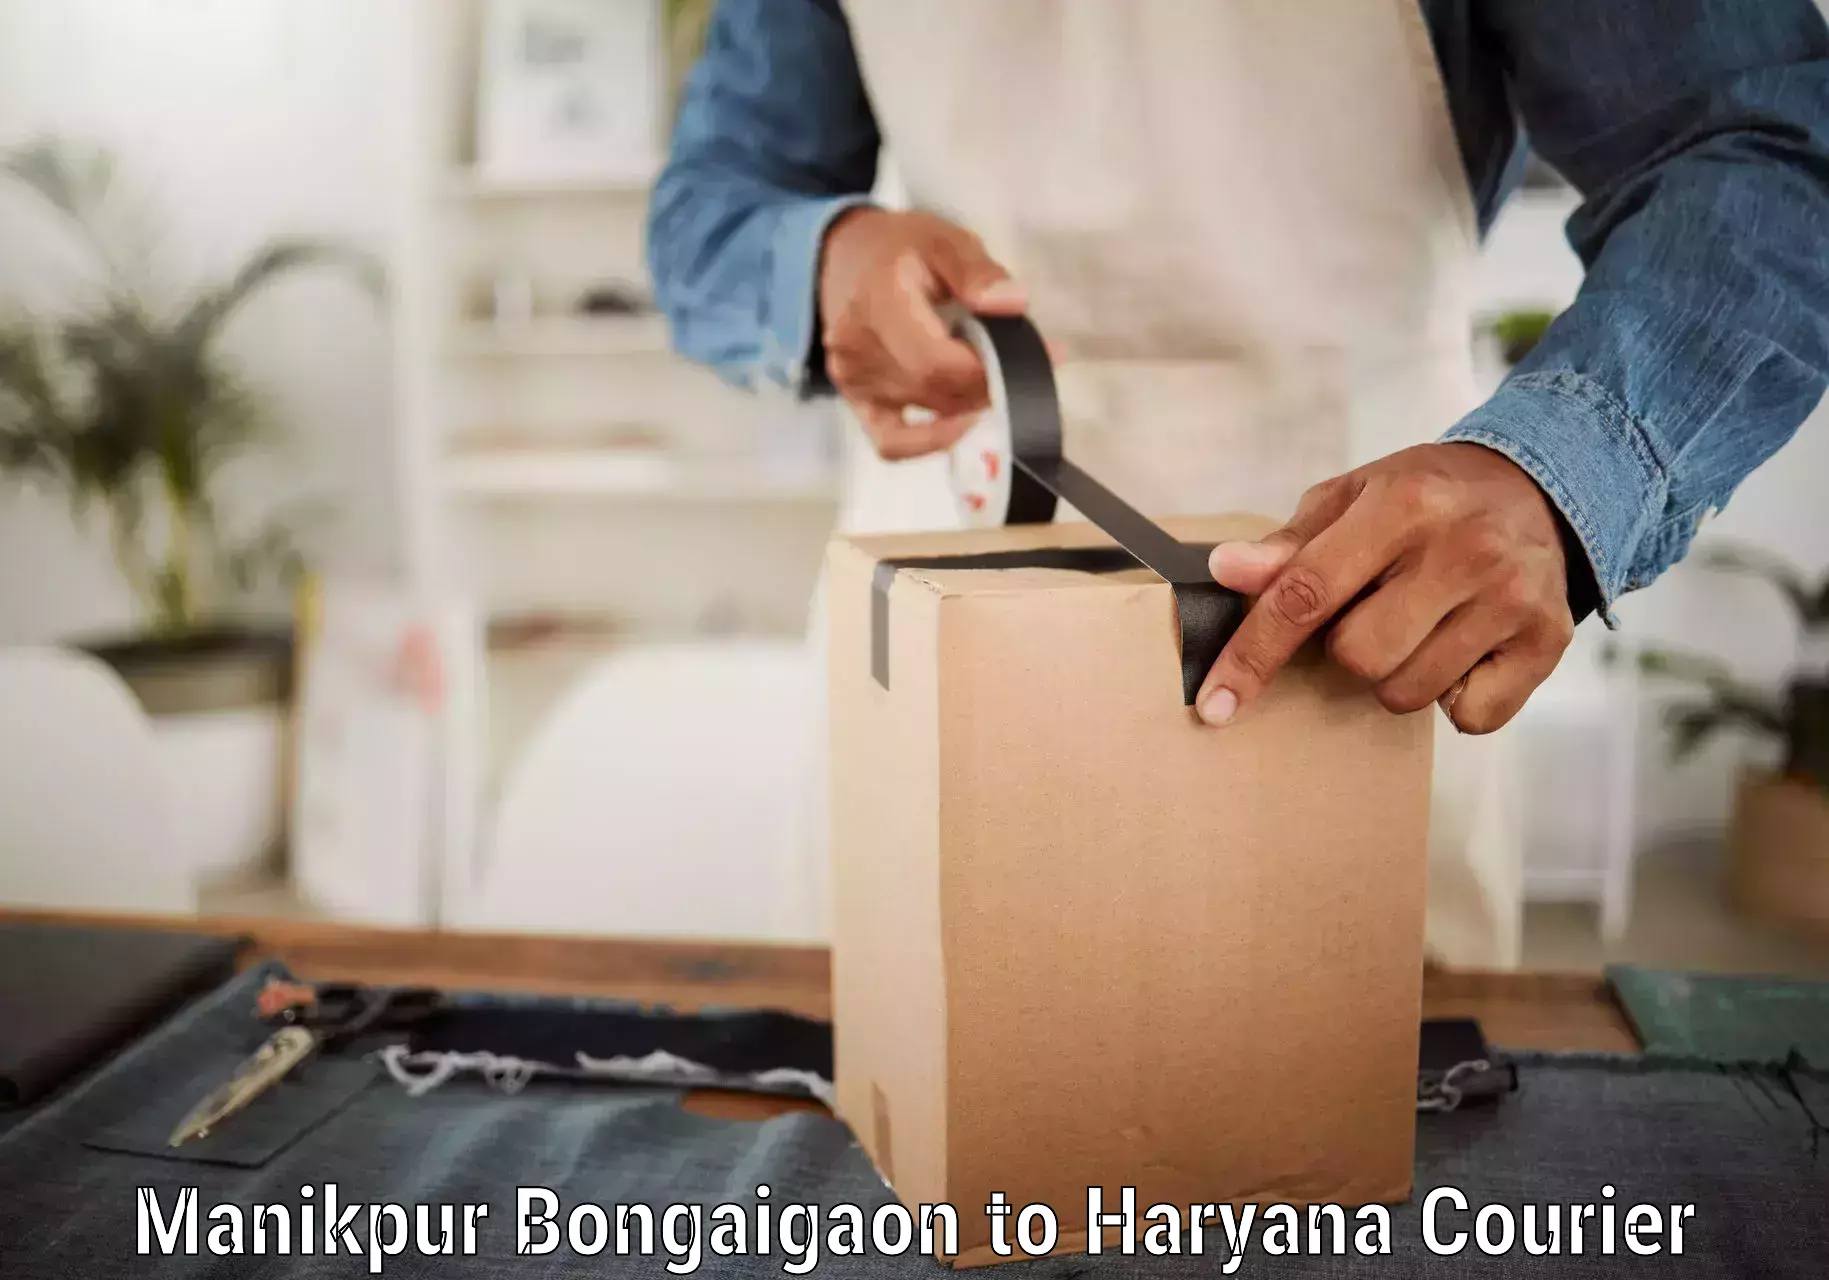 Parcel service for businesses Manikpur Bongaigaon to NCR Haryana